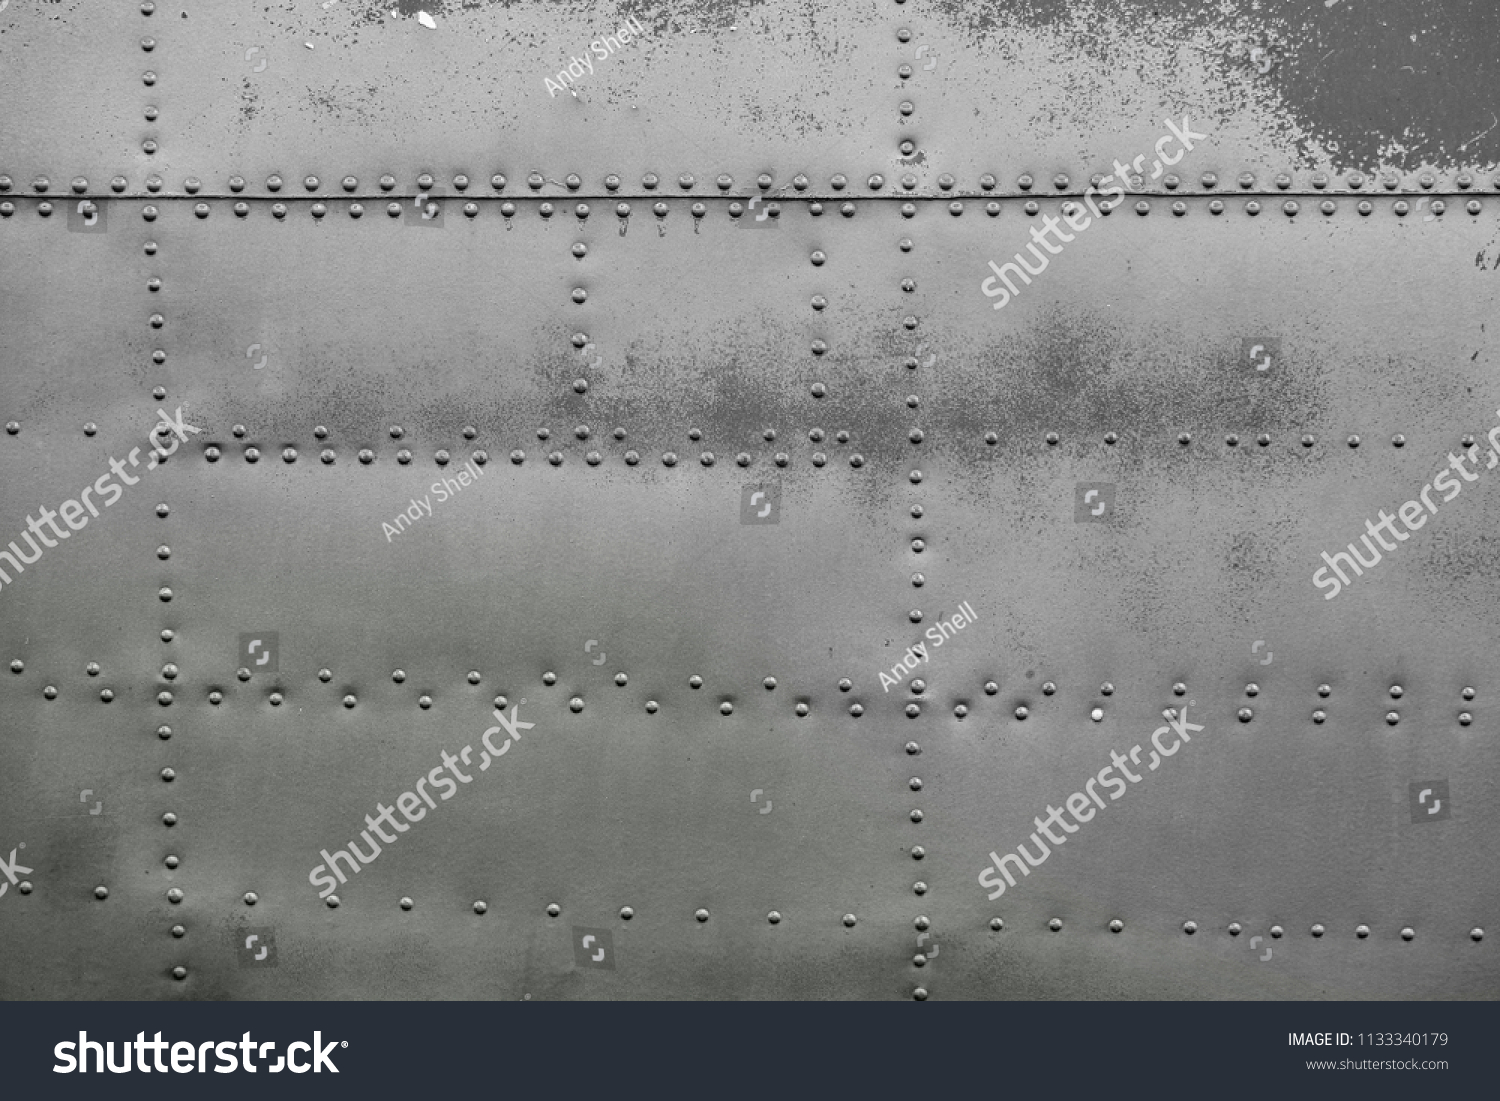 Old silver metal surface of the aircraft fuselage with rivets #1133340179